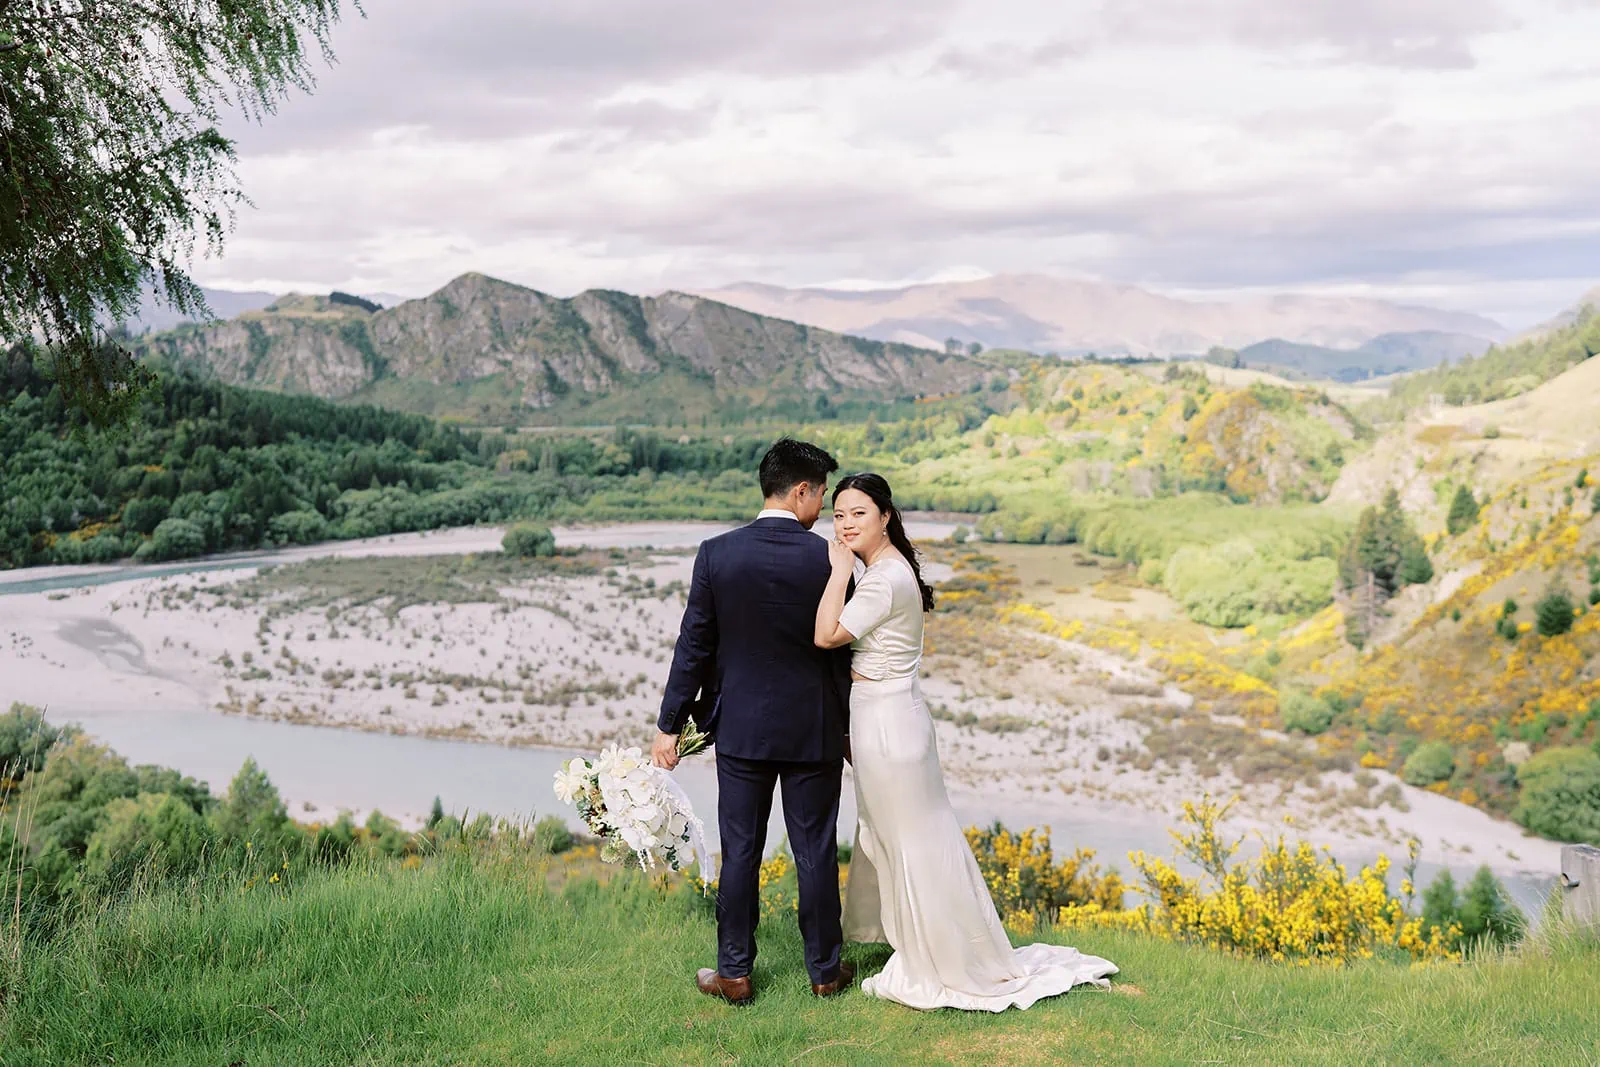 Queenstown Elopement Heli Wedding Photographer クイーンズタウン結婚式 | Pre-wedding photoshoot of a man and woman standing on a hill with mountains and trees.